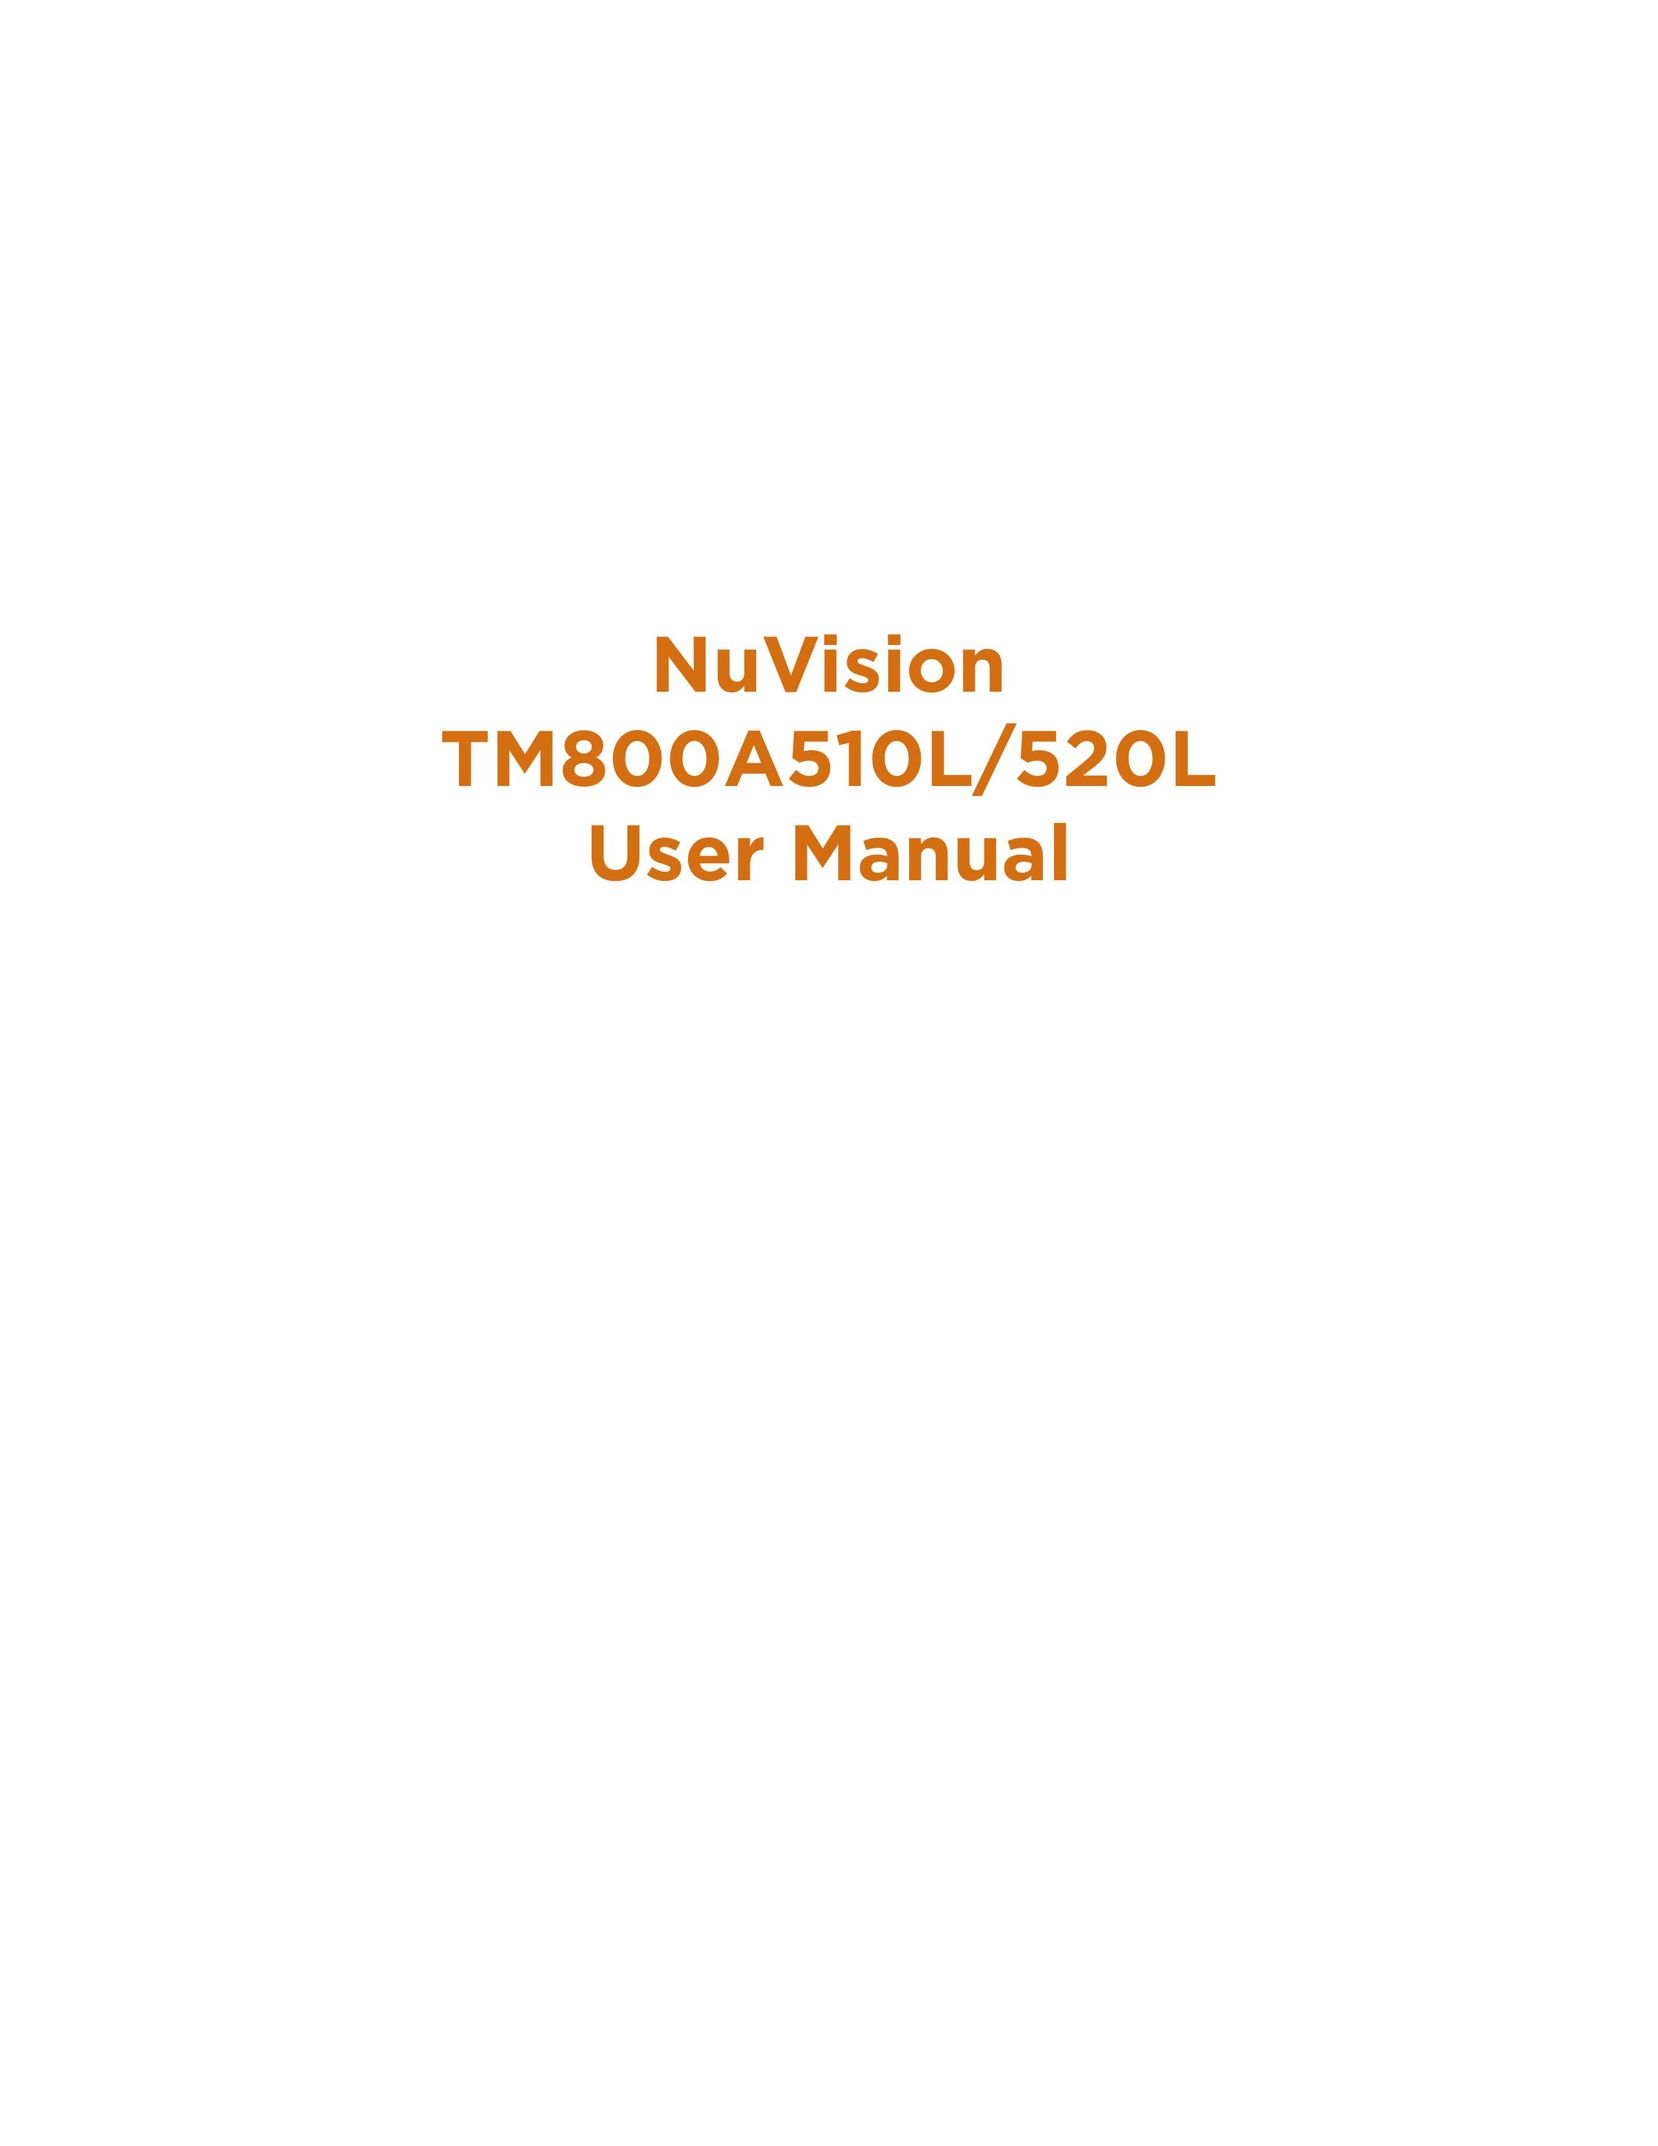 NuVision 520L Graphics Tablet User Manual